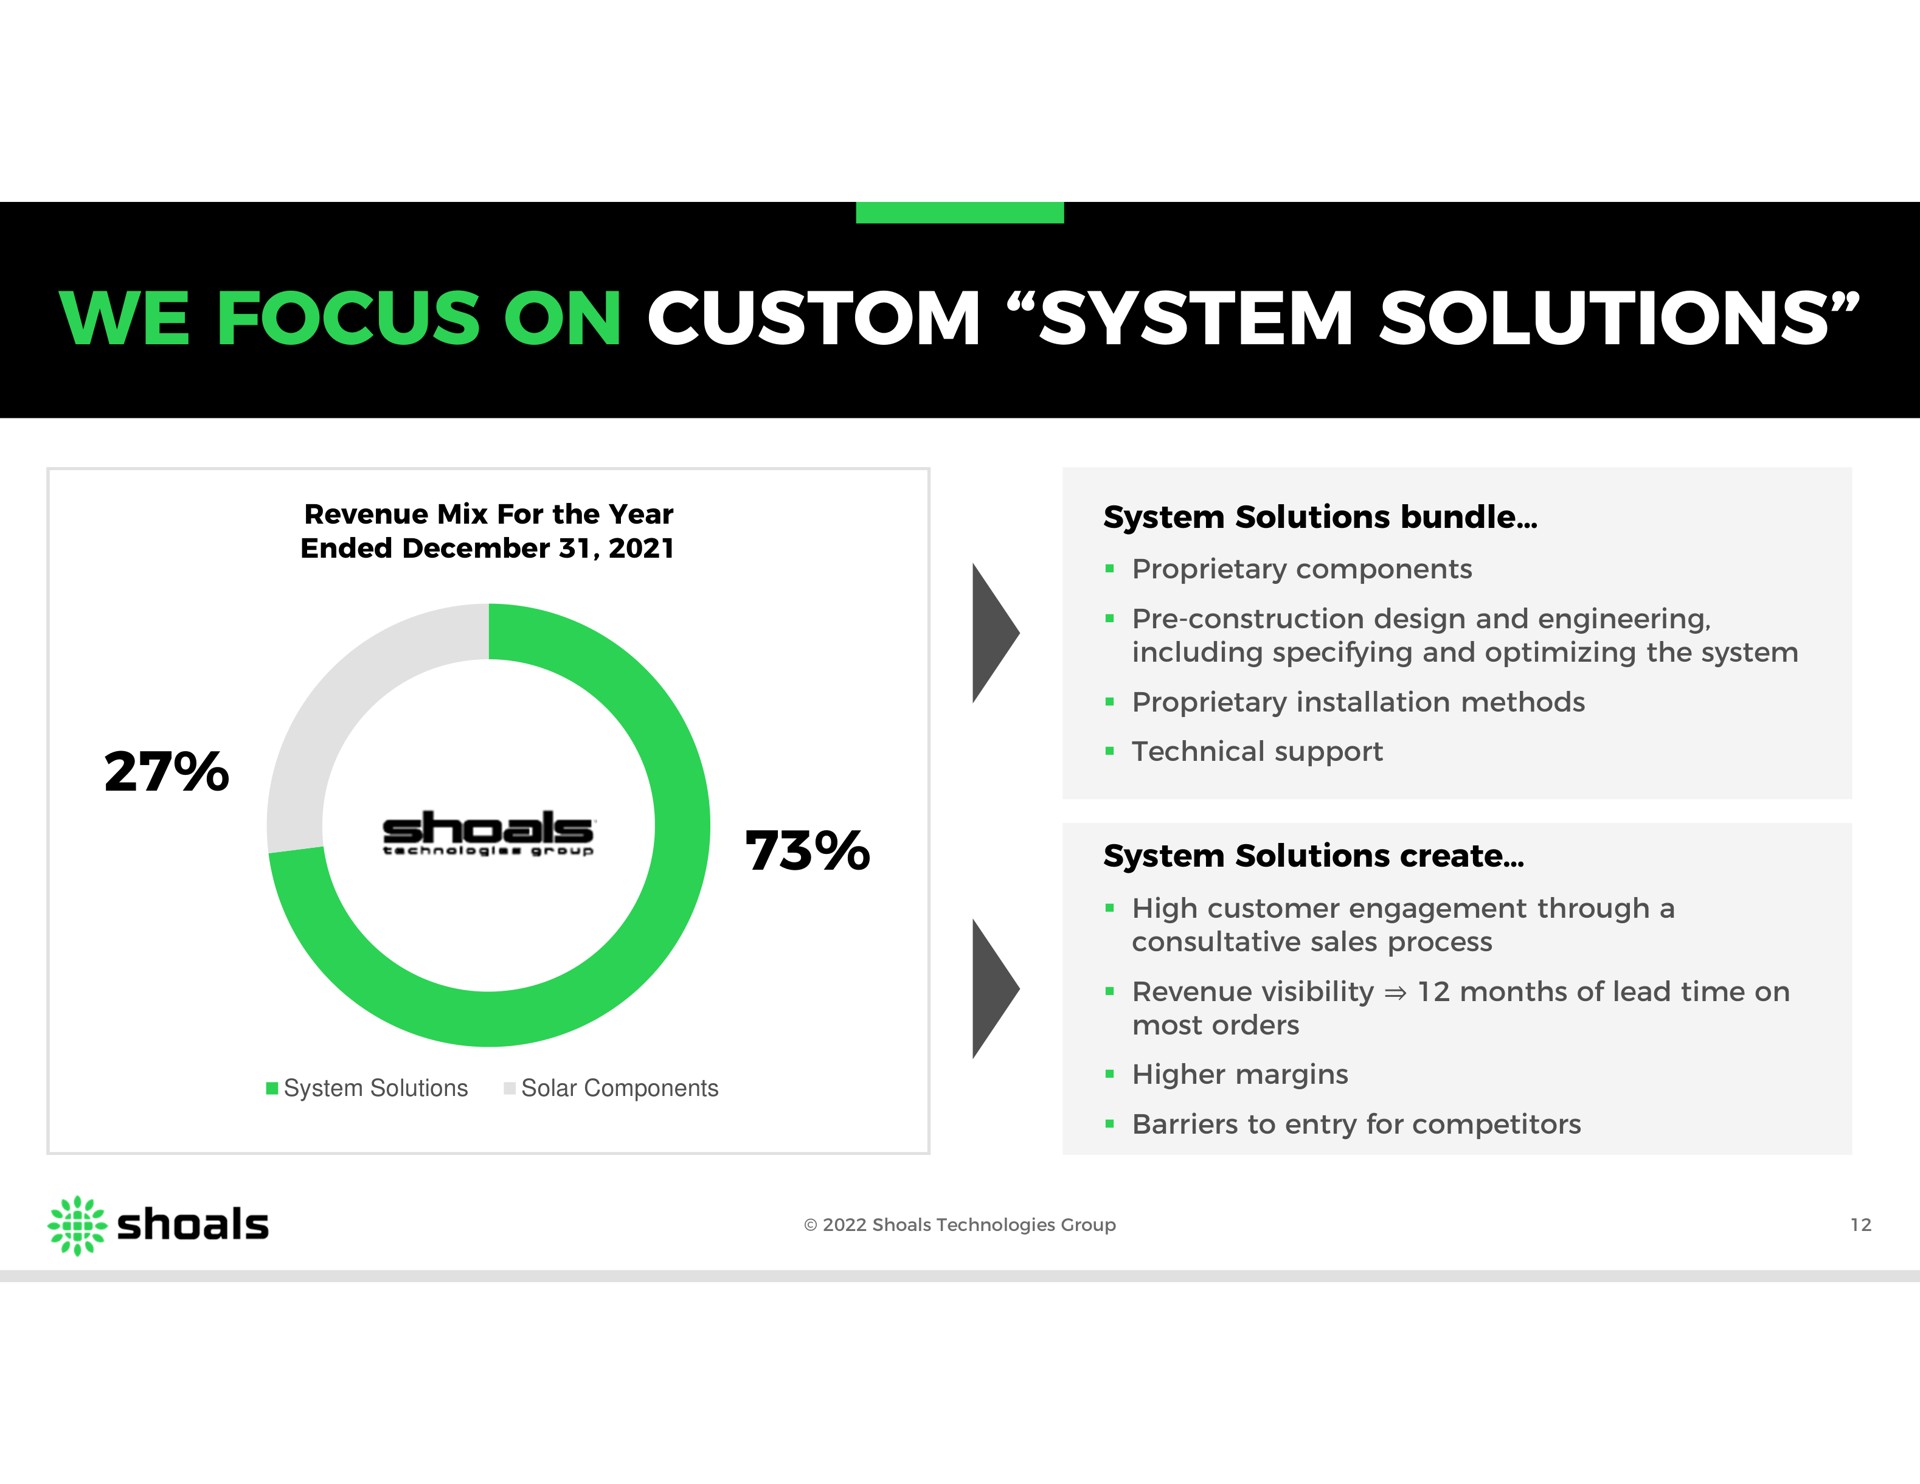 we focus on custom system solutions | Shoals